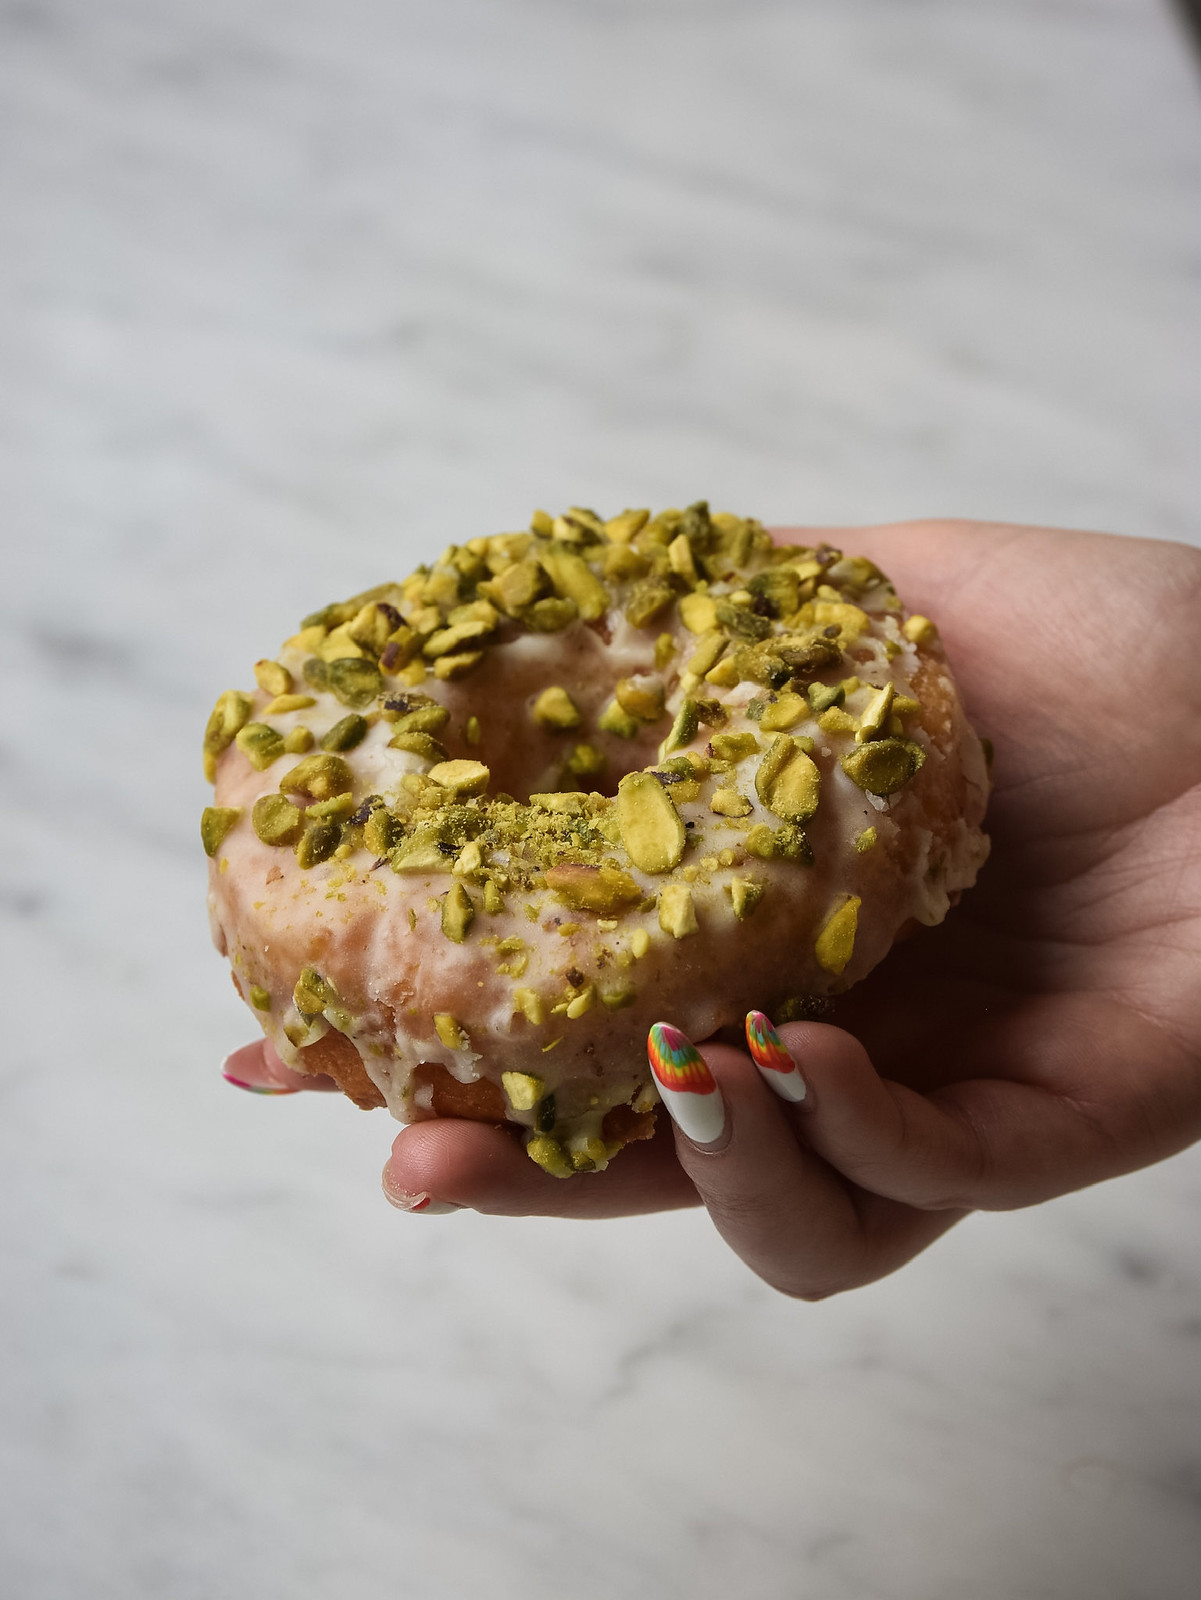 Tatte Bakery Pistachio Donut | What to Eat in Boston | New England Road Trip Itinerary - New England Road Trip - The Ultimate 7 Day Itinerary - The Perfect Summer New England Road Trip Itinerary